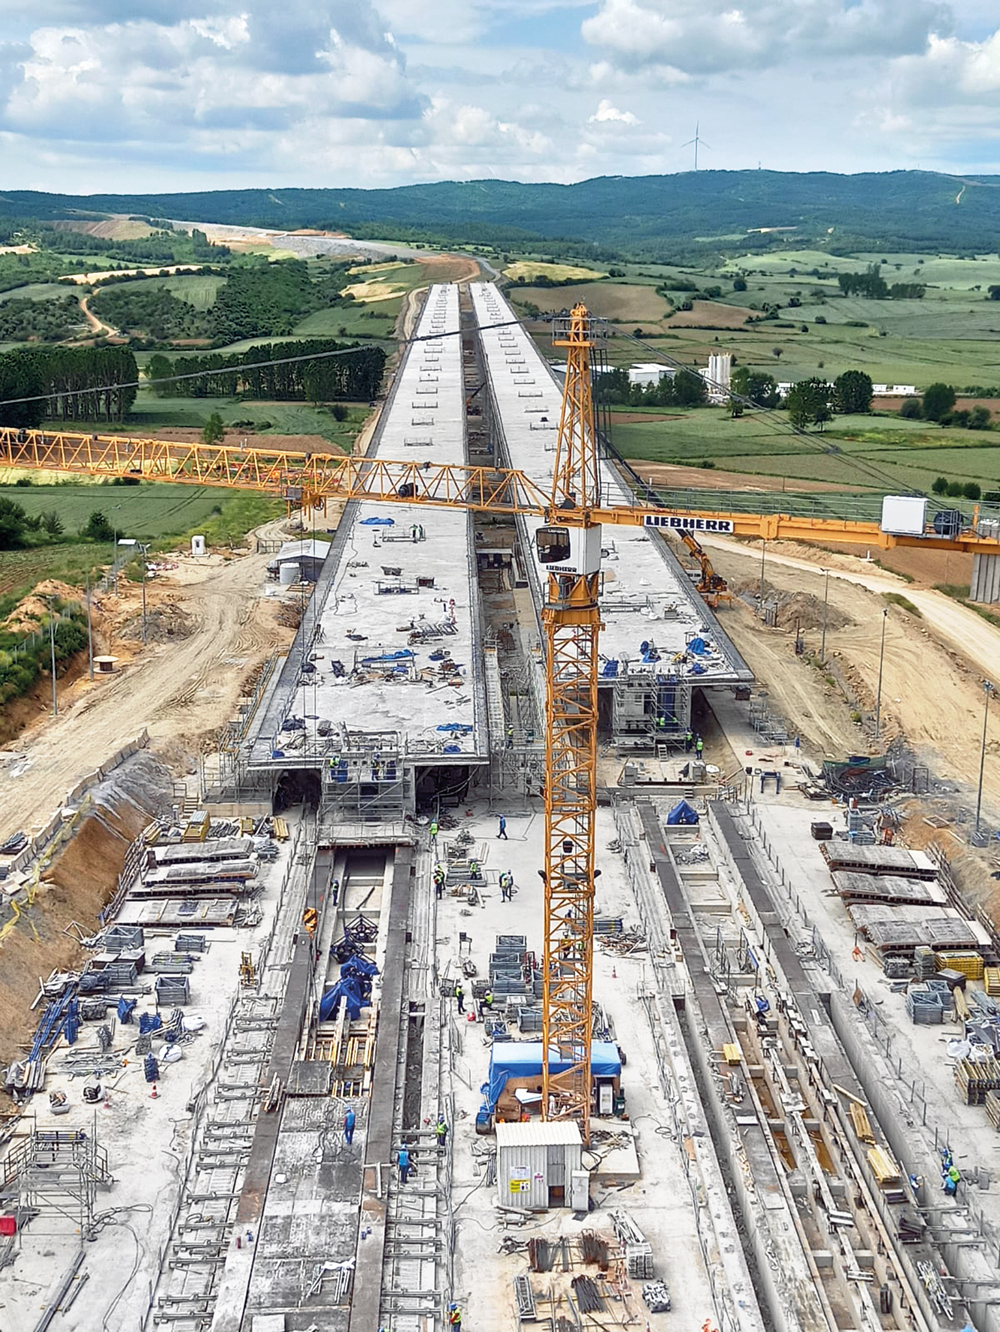 Ongoing work at the Çanakkale Viaduct, which will provide a valuable commuting route across The Dardanelles upon completion